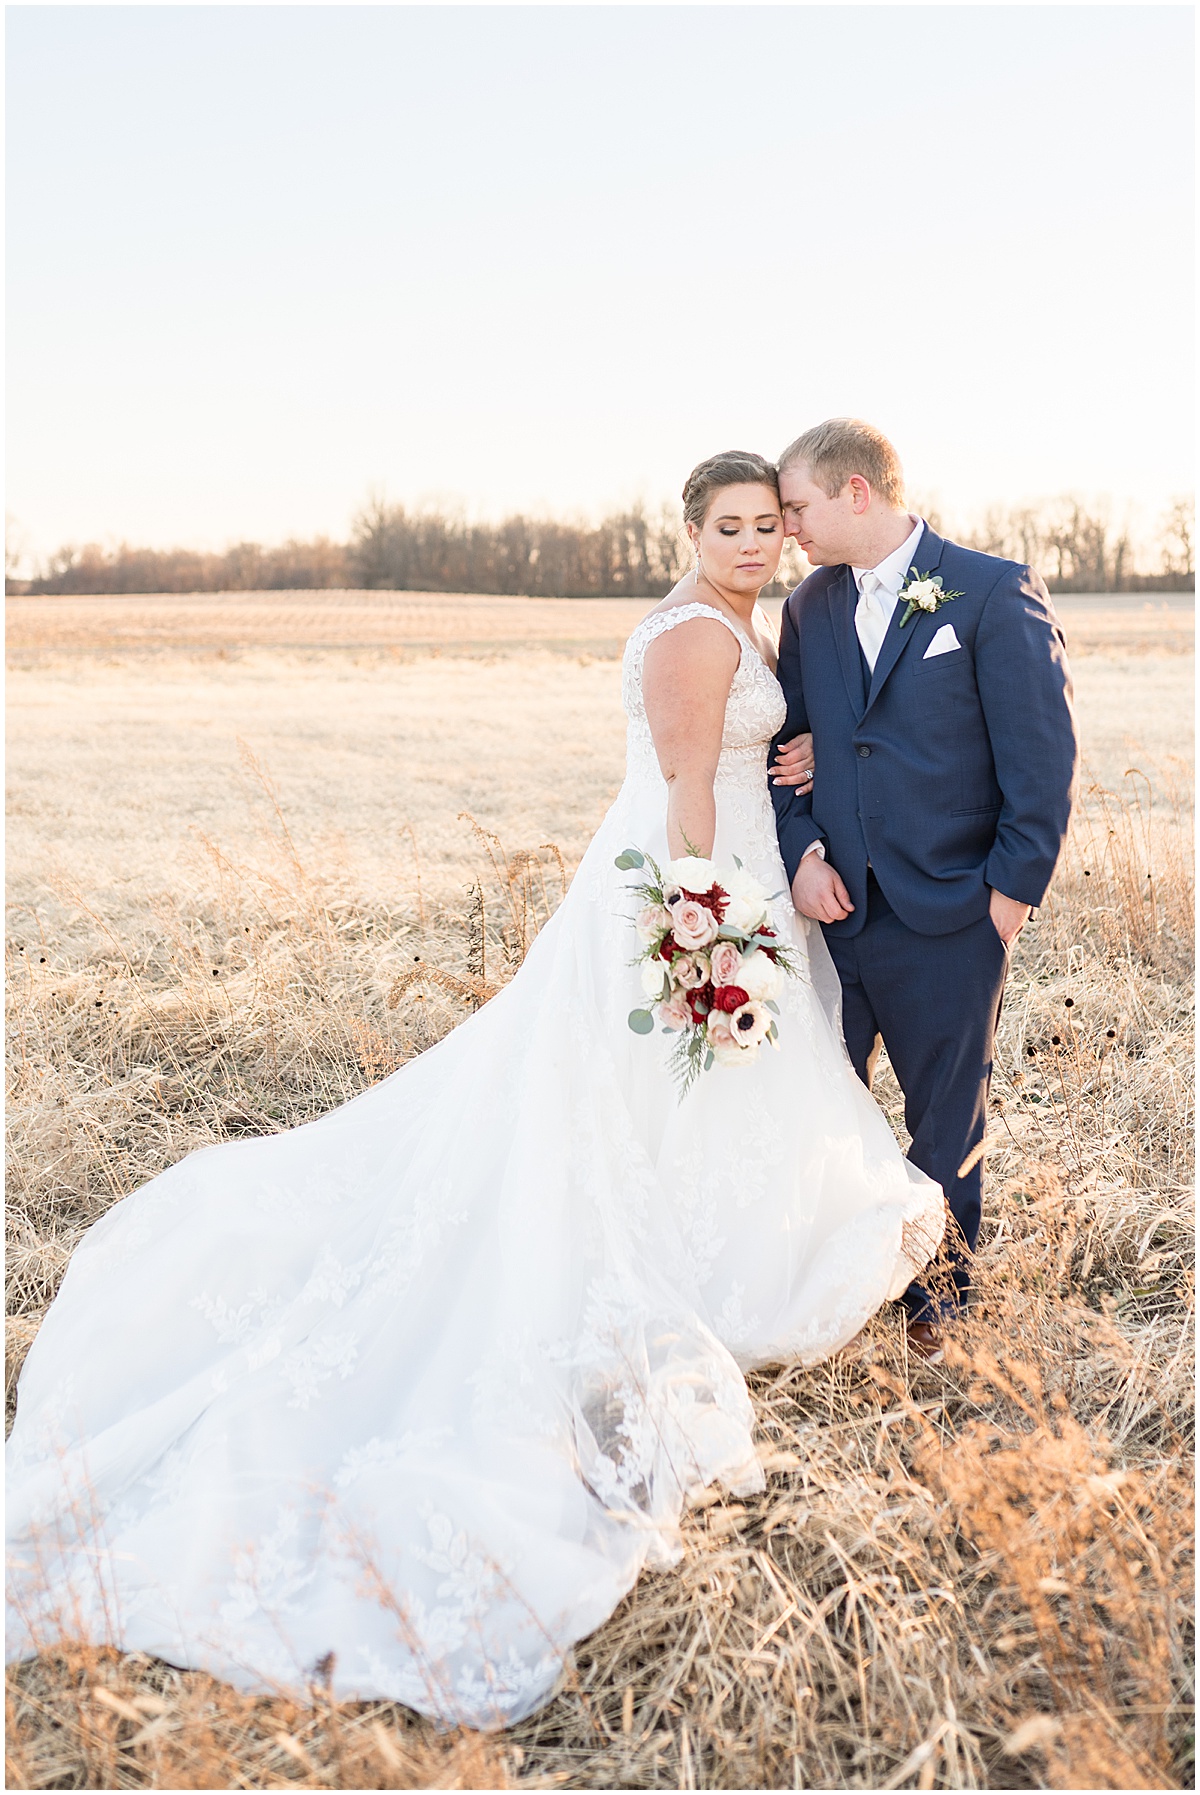 Bride and groom get close during sunset photos after December wedding at New Journey Farms in Lafayette, Indiana photographed by Victoria Rayburn Photography